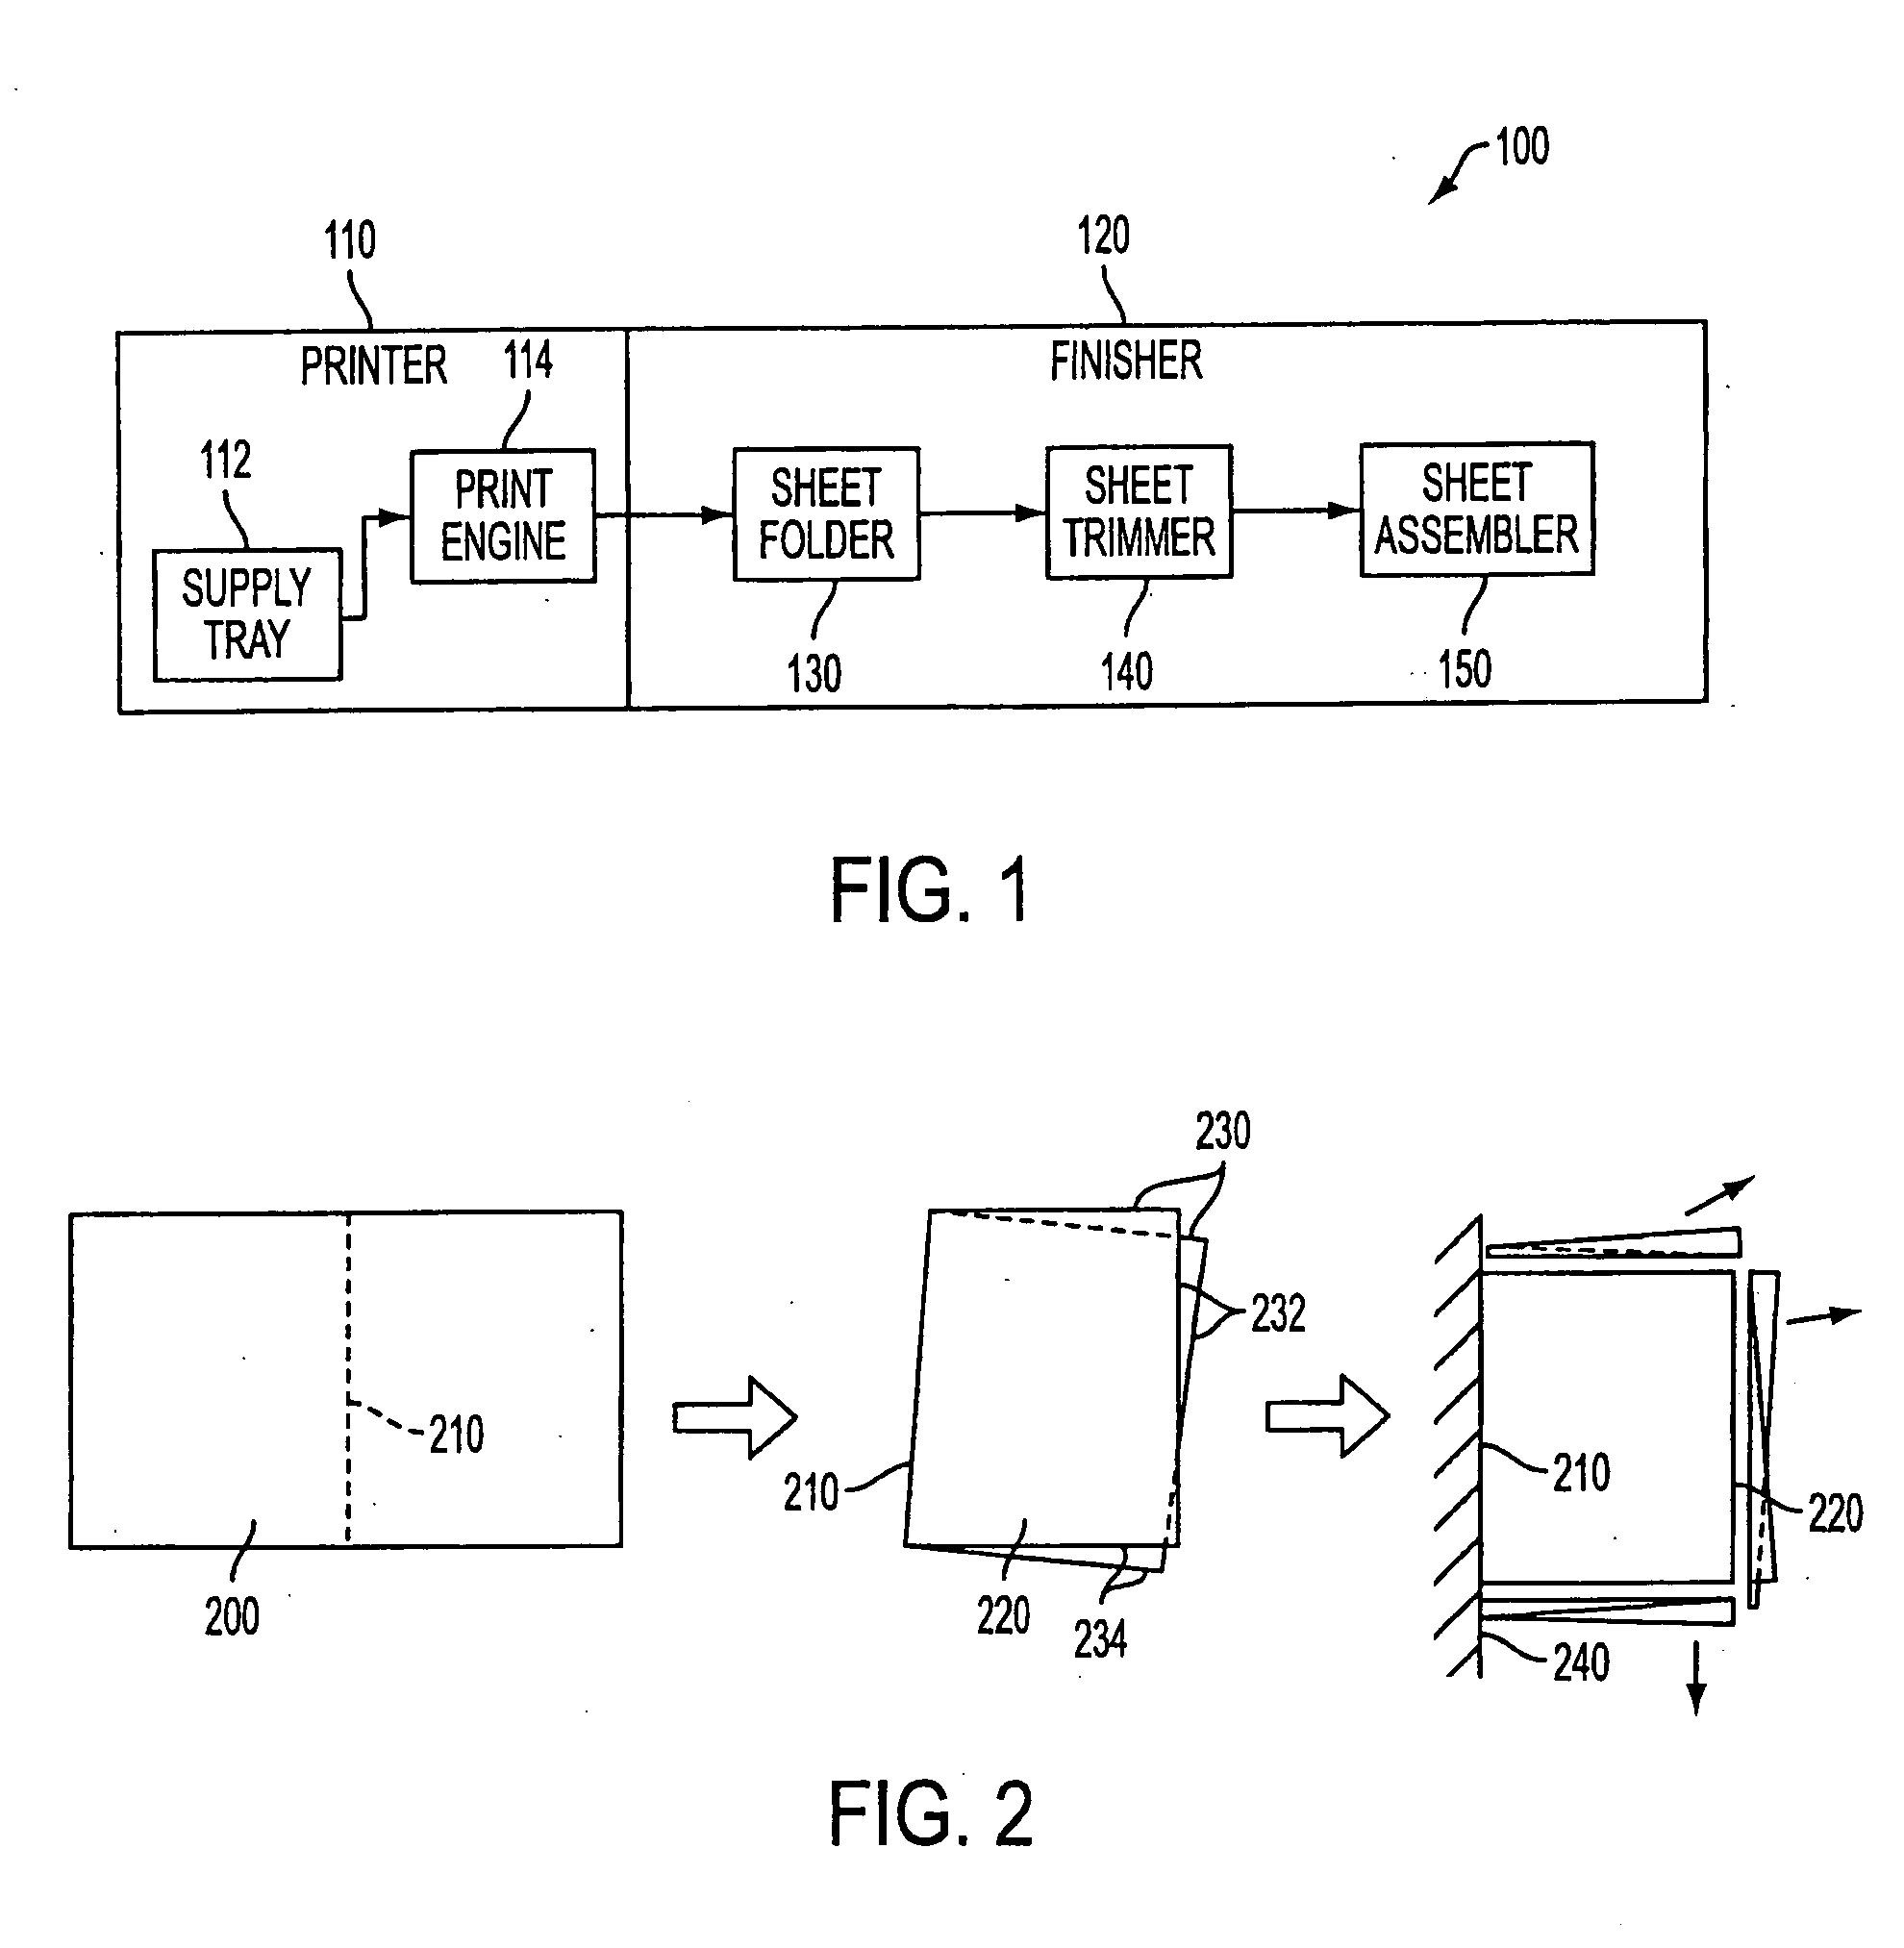 Sheet folding and trimming apparatus